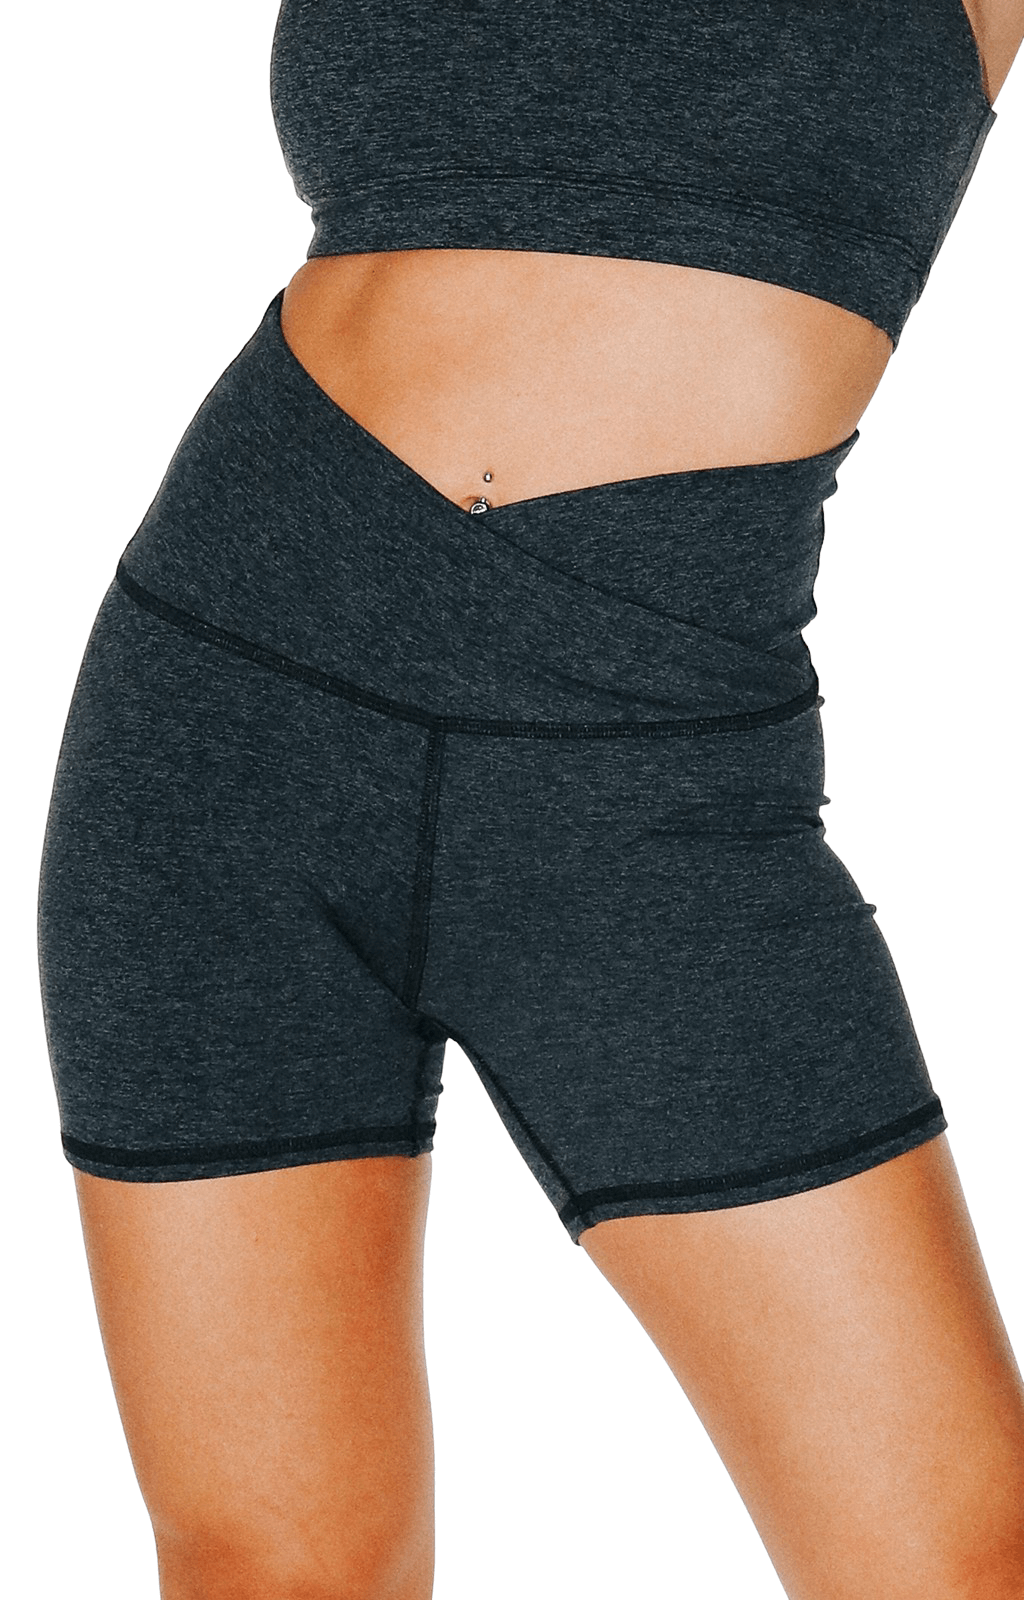 Movement Short in Charcoal Heather 